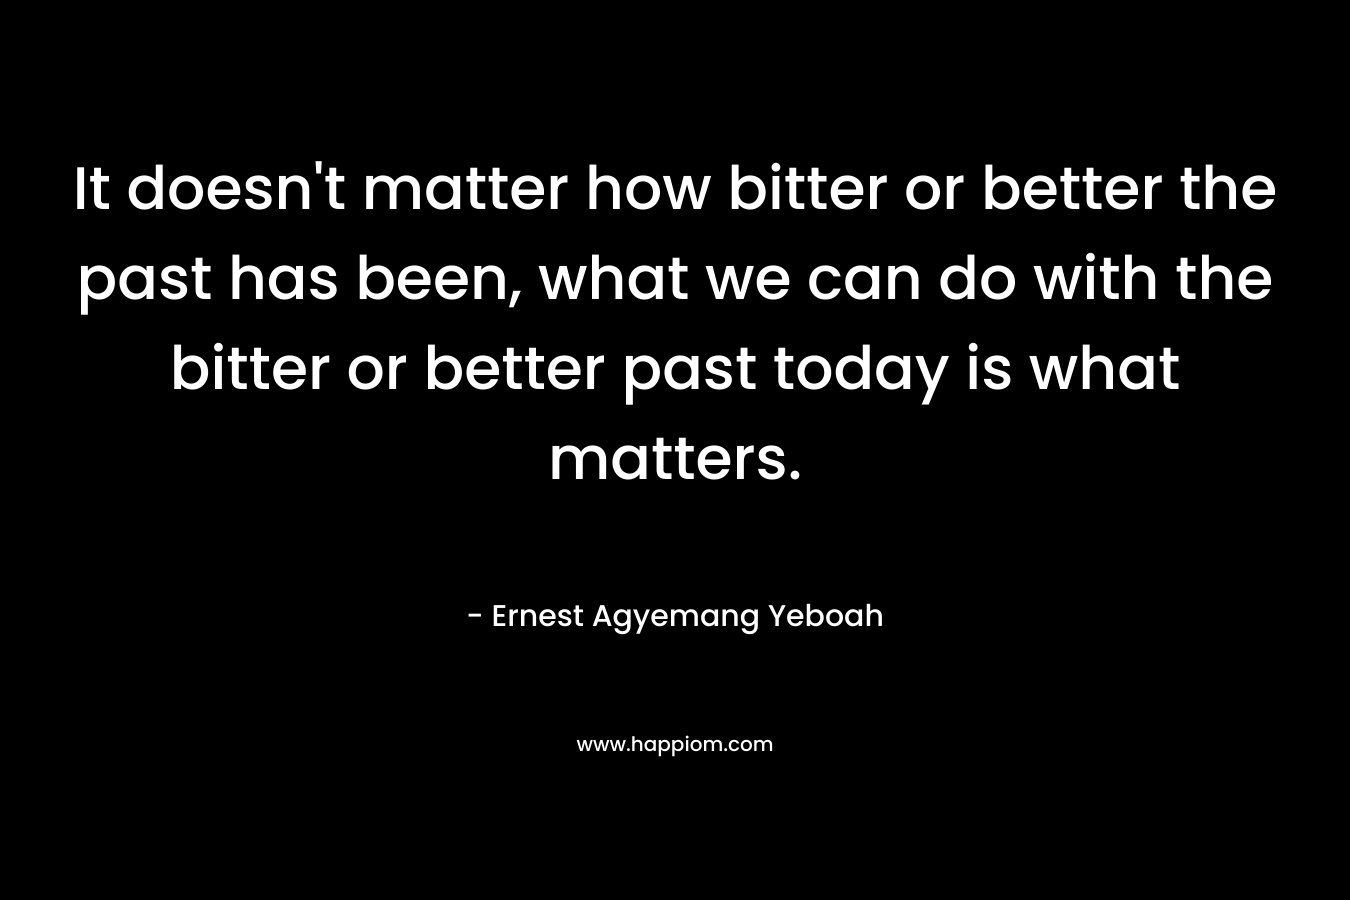 It doesn't matter how bitter or better the past has been, what we can do with the bitter or better past today is what matters.